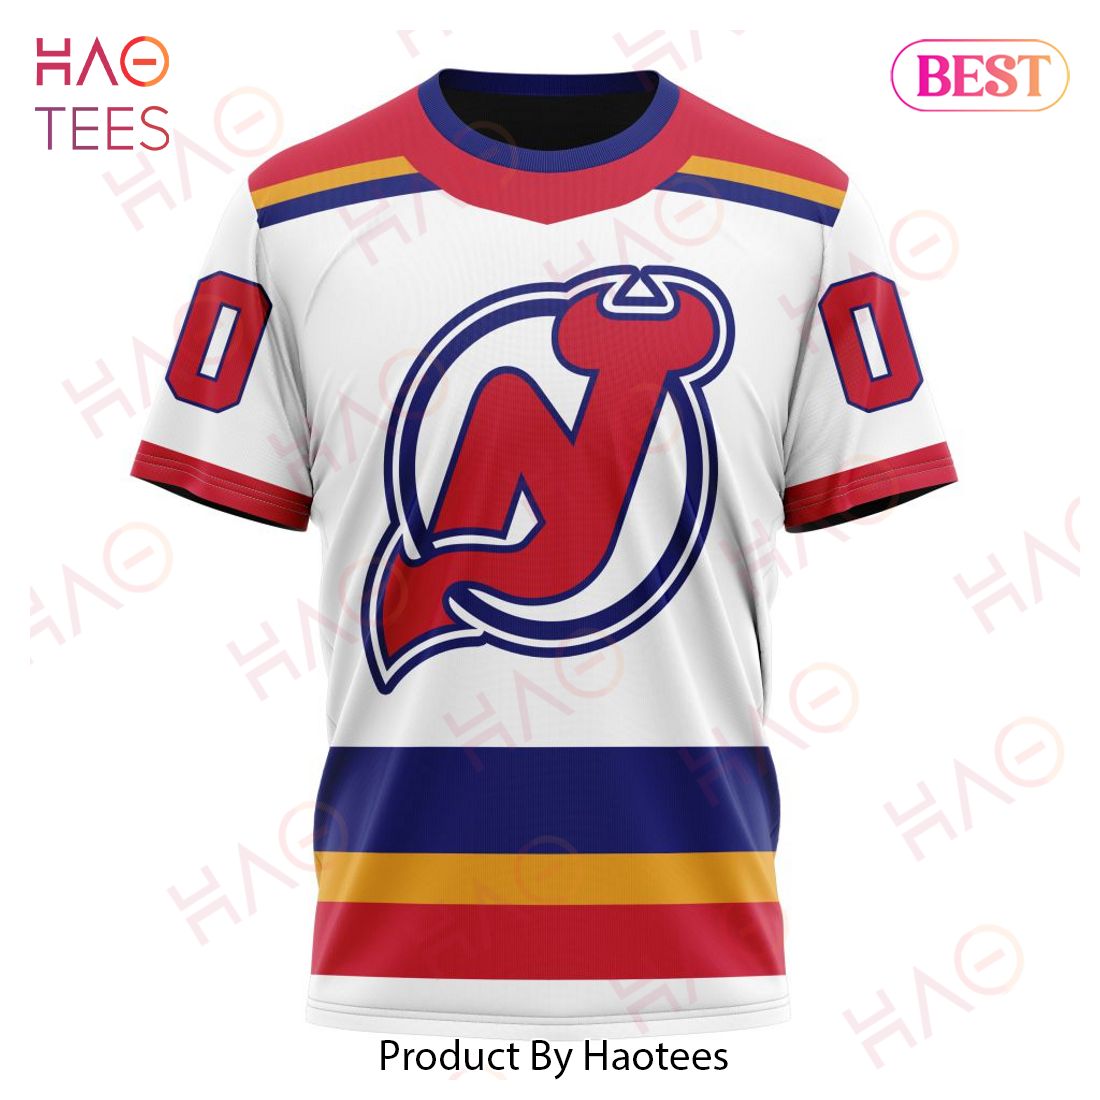 The Devils had the perfect post about their Reverse-Retro threads